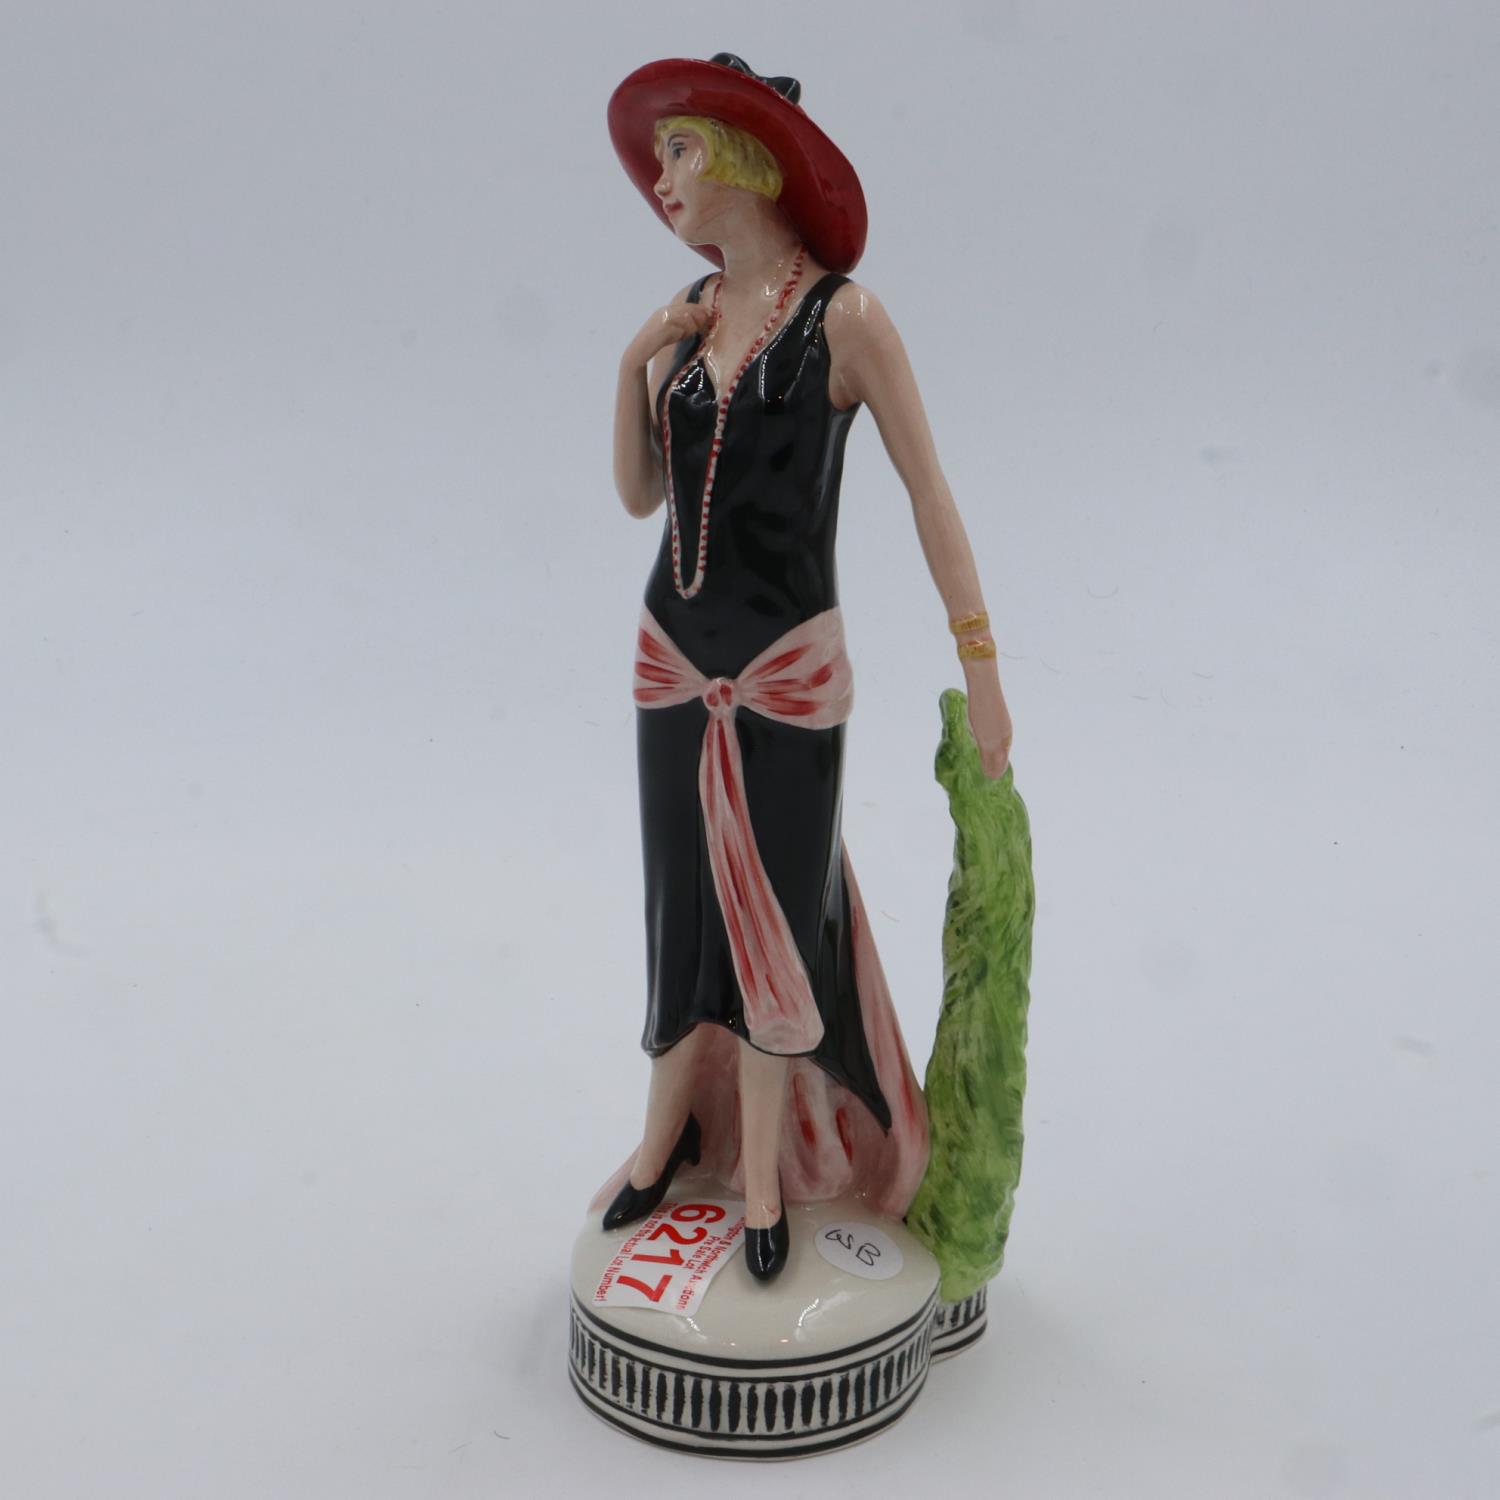 Lionel and Lorna Bailey limited edition figurine, Sarah, 6/40, H: 27 cm, no chips or cracks. UK P&